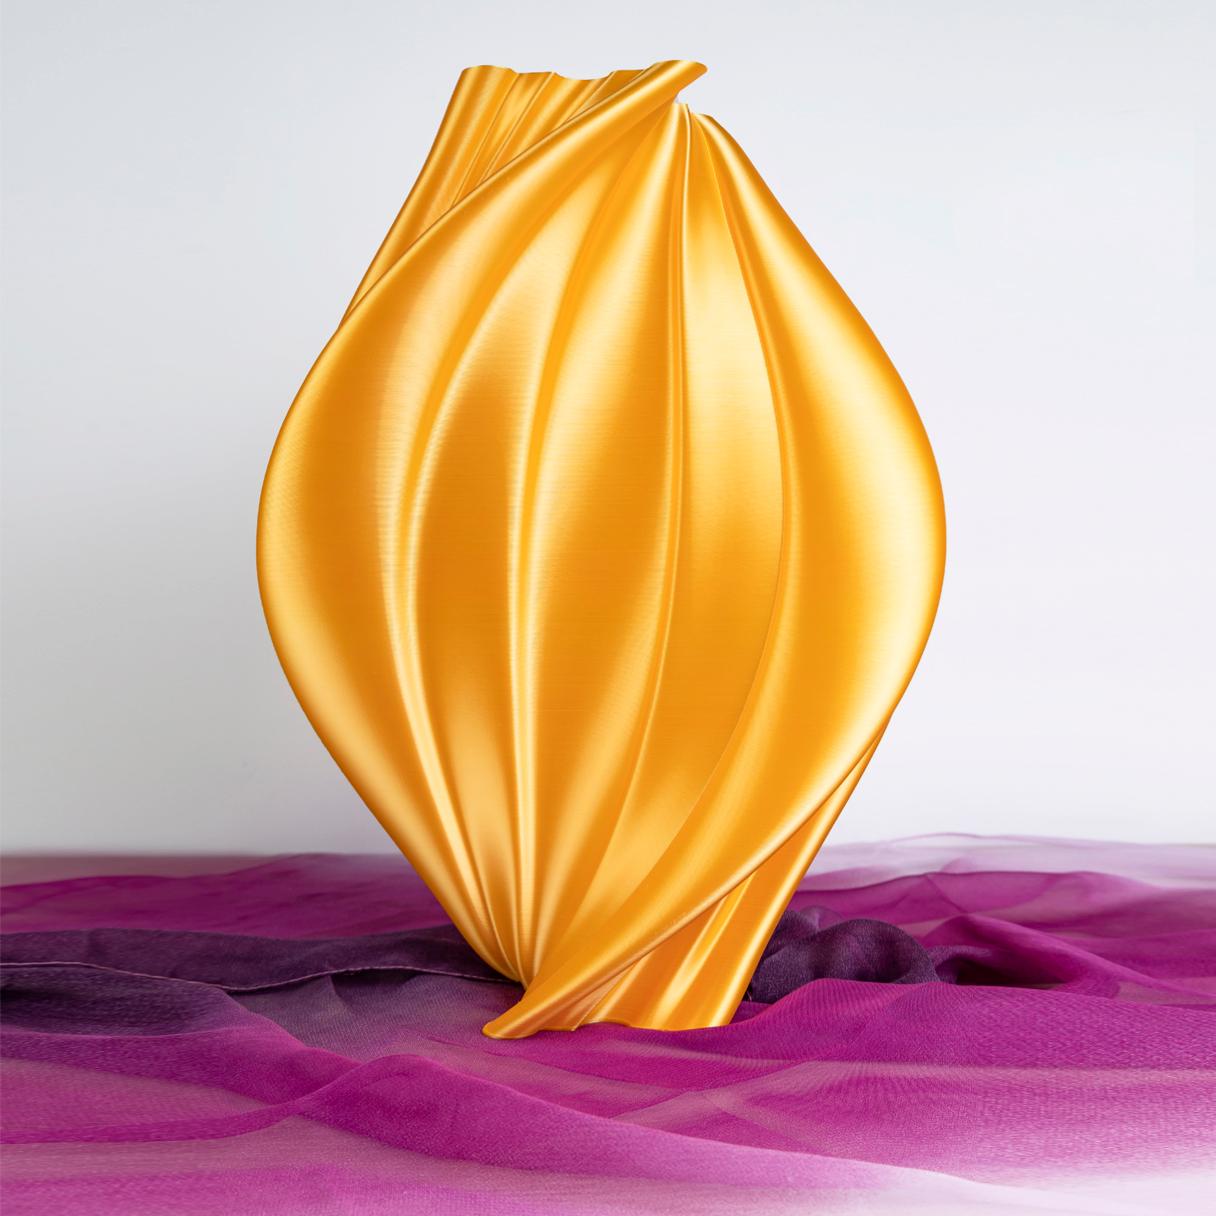 Vase-sculpture by DygoDesign

A majestic and harmonious design of unprecedented charm, this precious sculpture is defined by sinuous lines twirling into a soft and soothing 